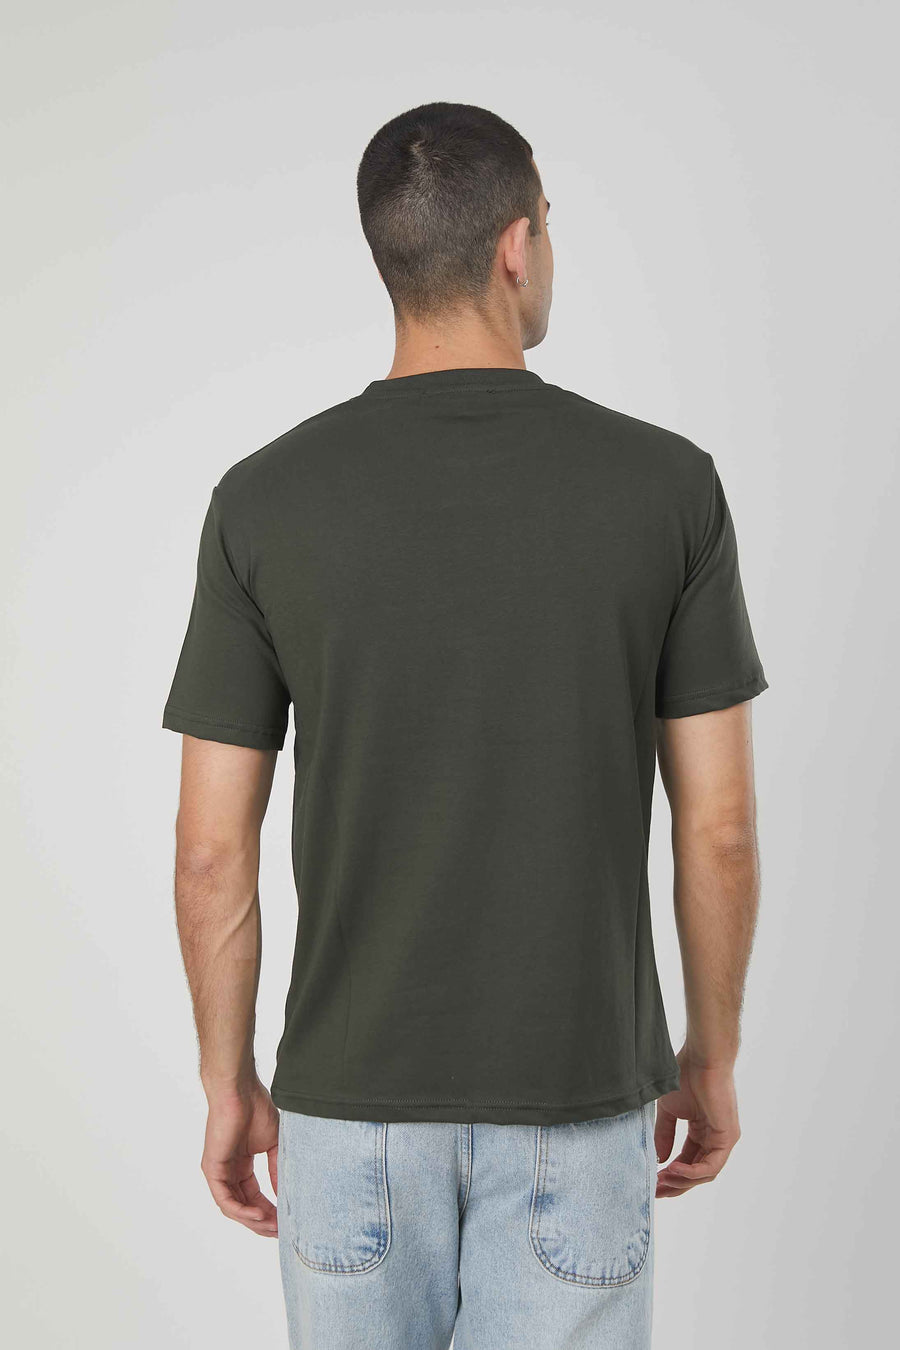 MILITARY STYLE PRESS T-SHIRT